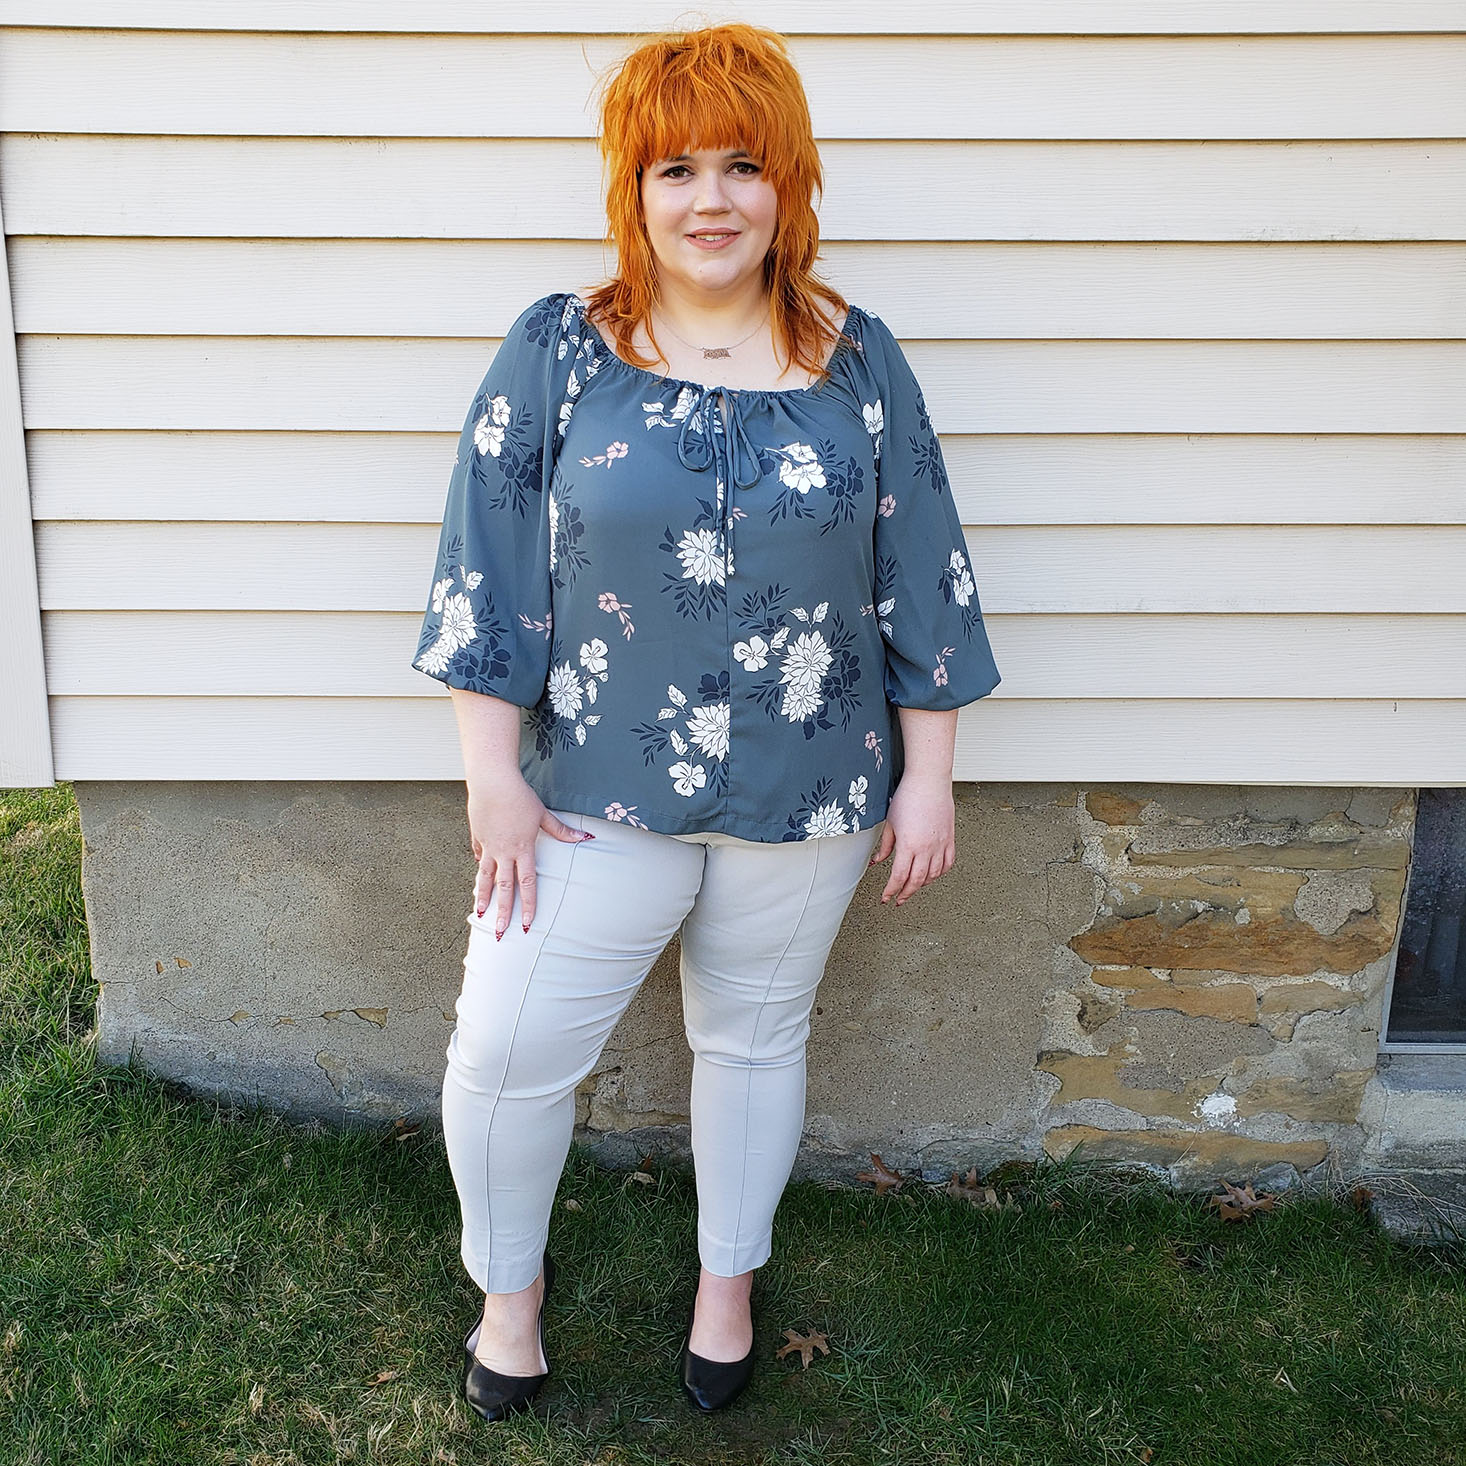 Dia & Co Clothing Box Review + Coupon - March 2020 | MSA